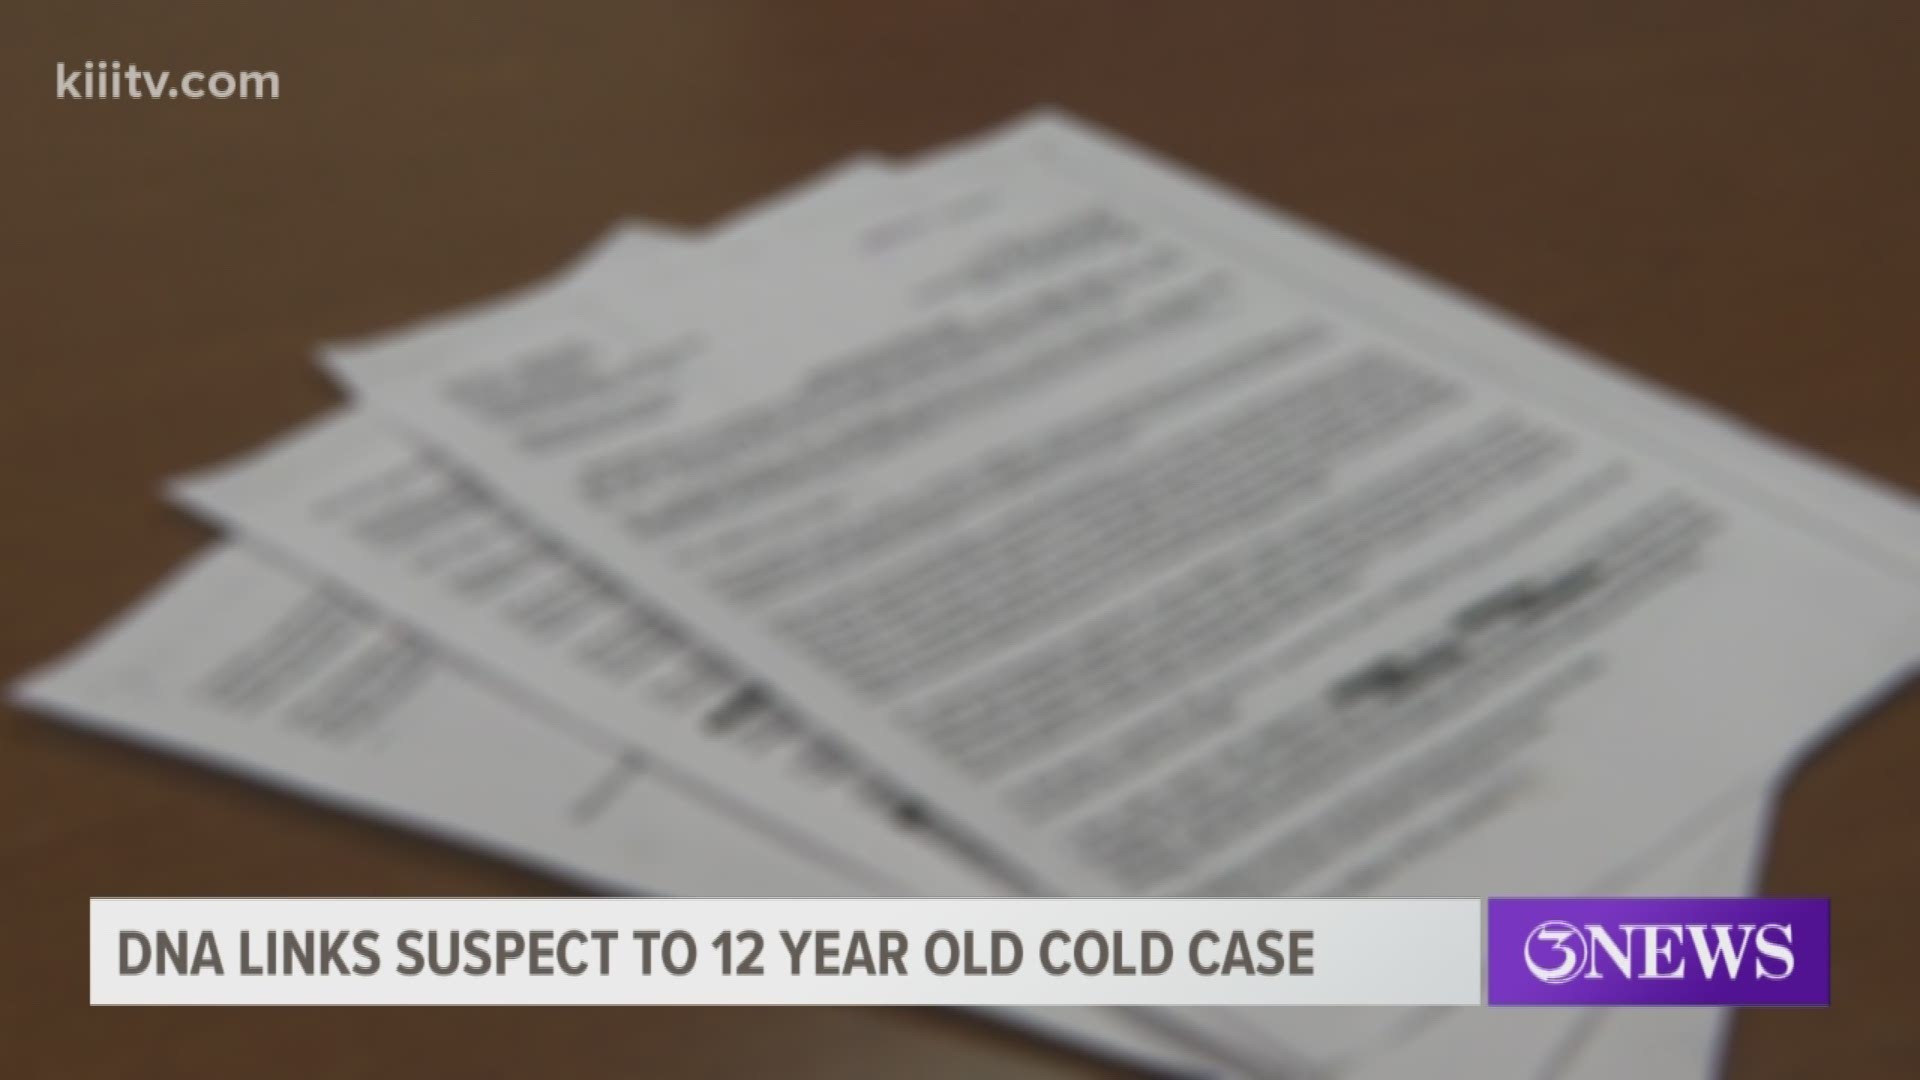 A break has been made in a cold case that has baffled law officers and the justice system for more than a dozen years.